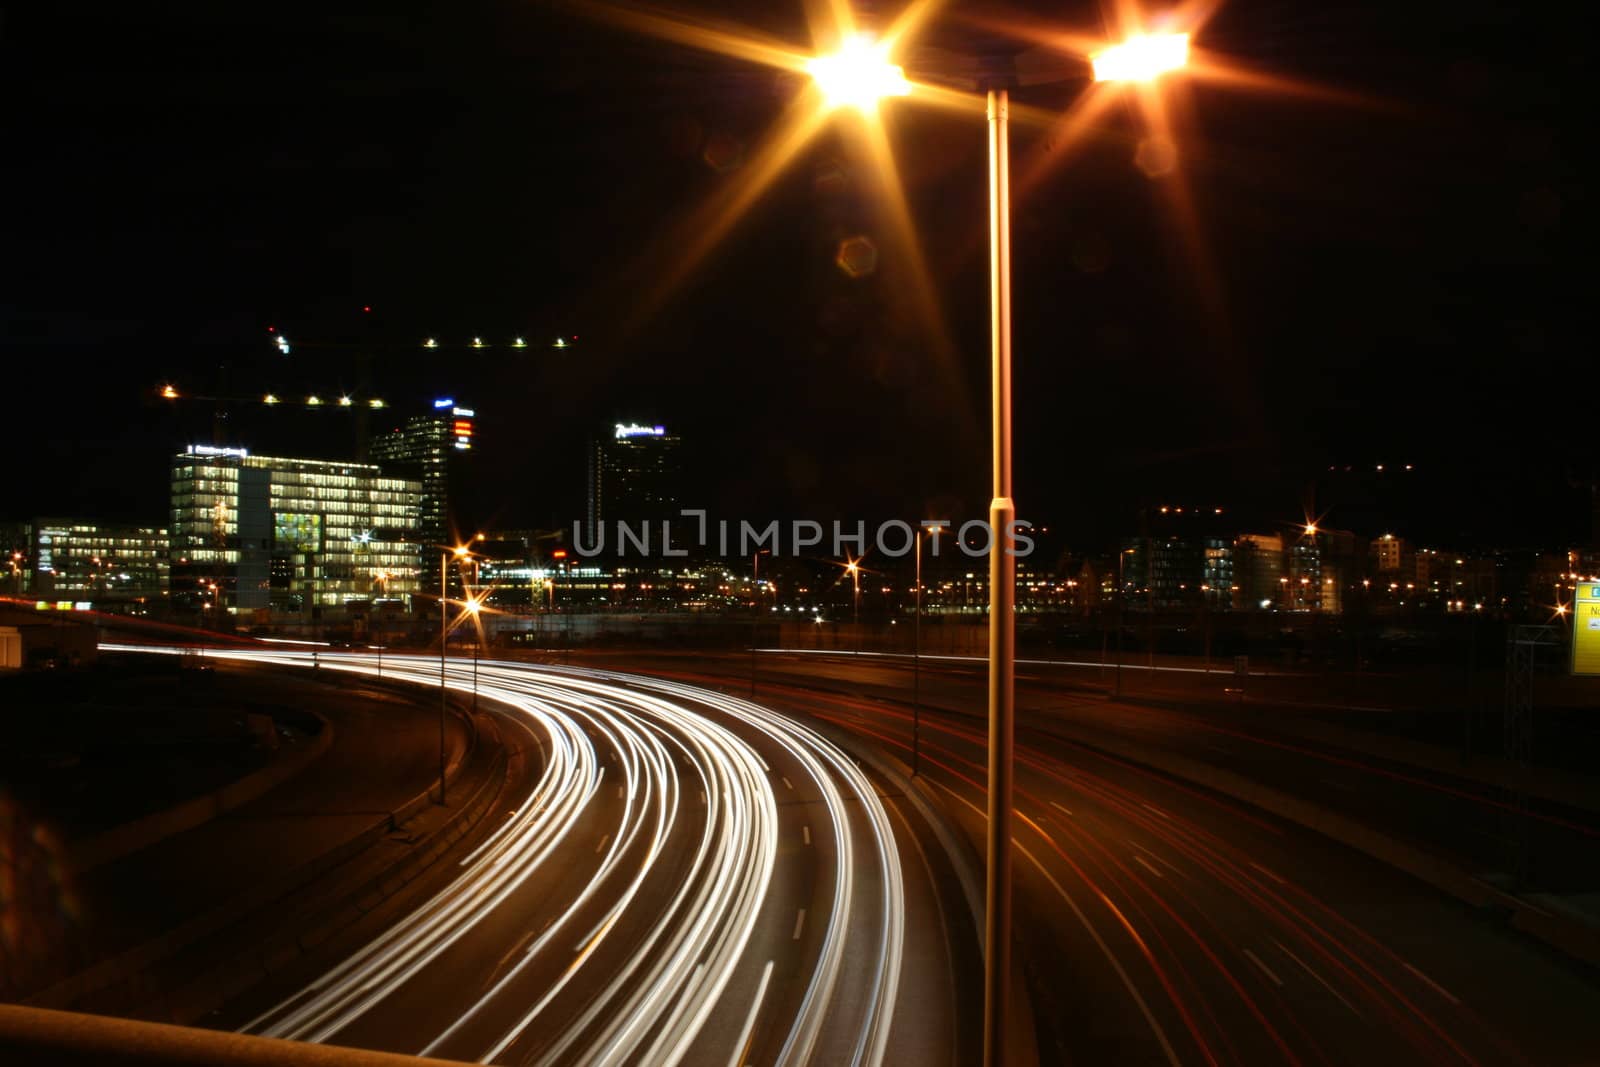 Cars in Oslo at night.